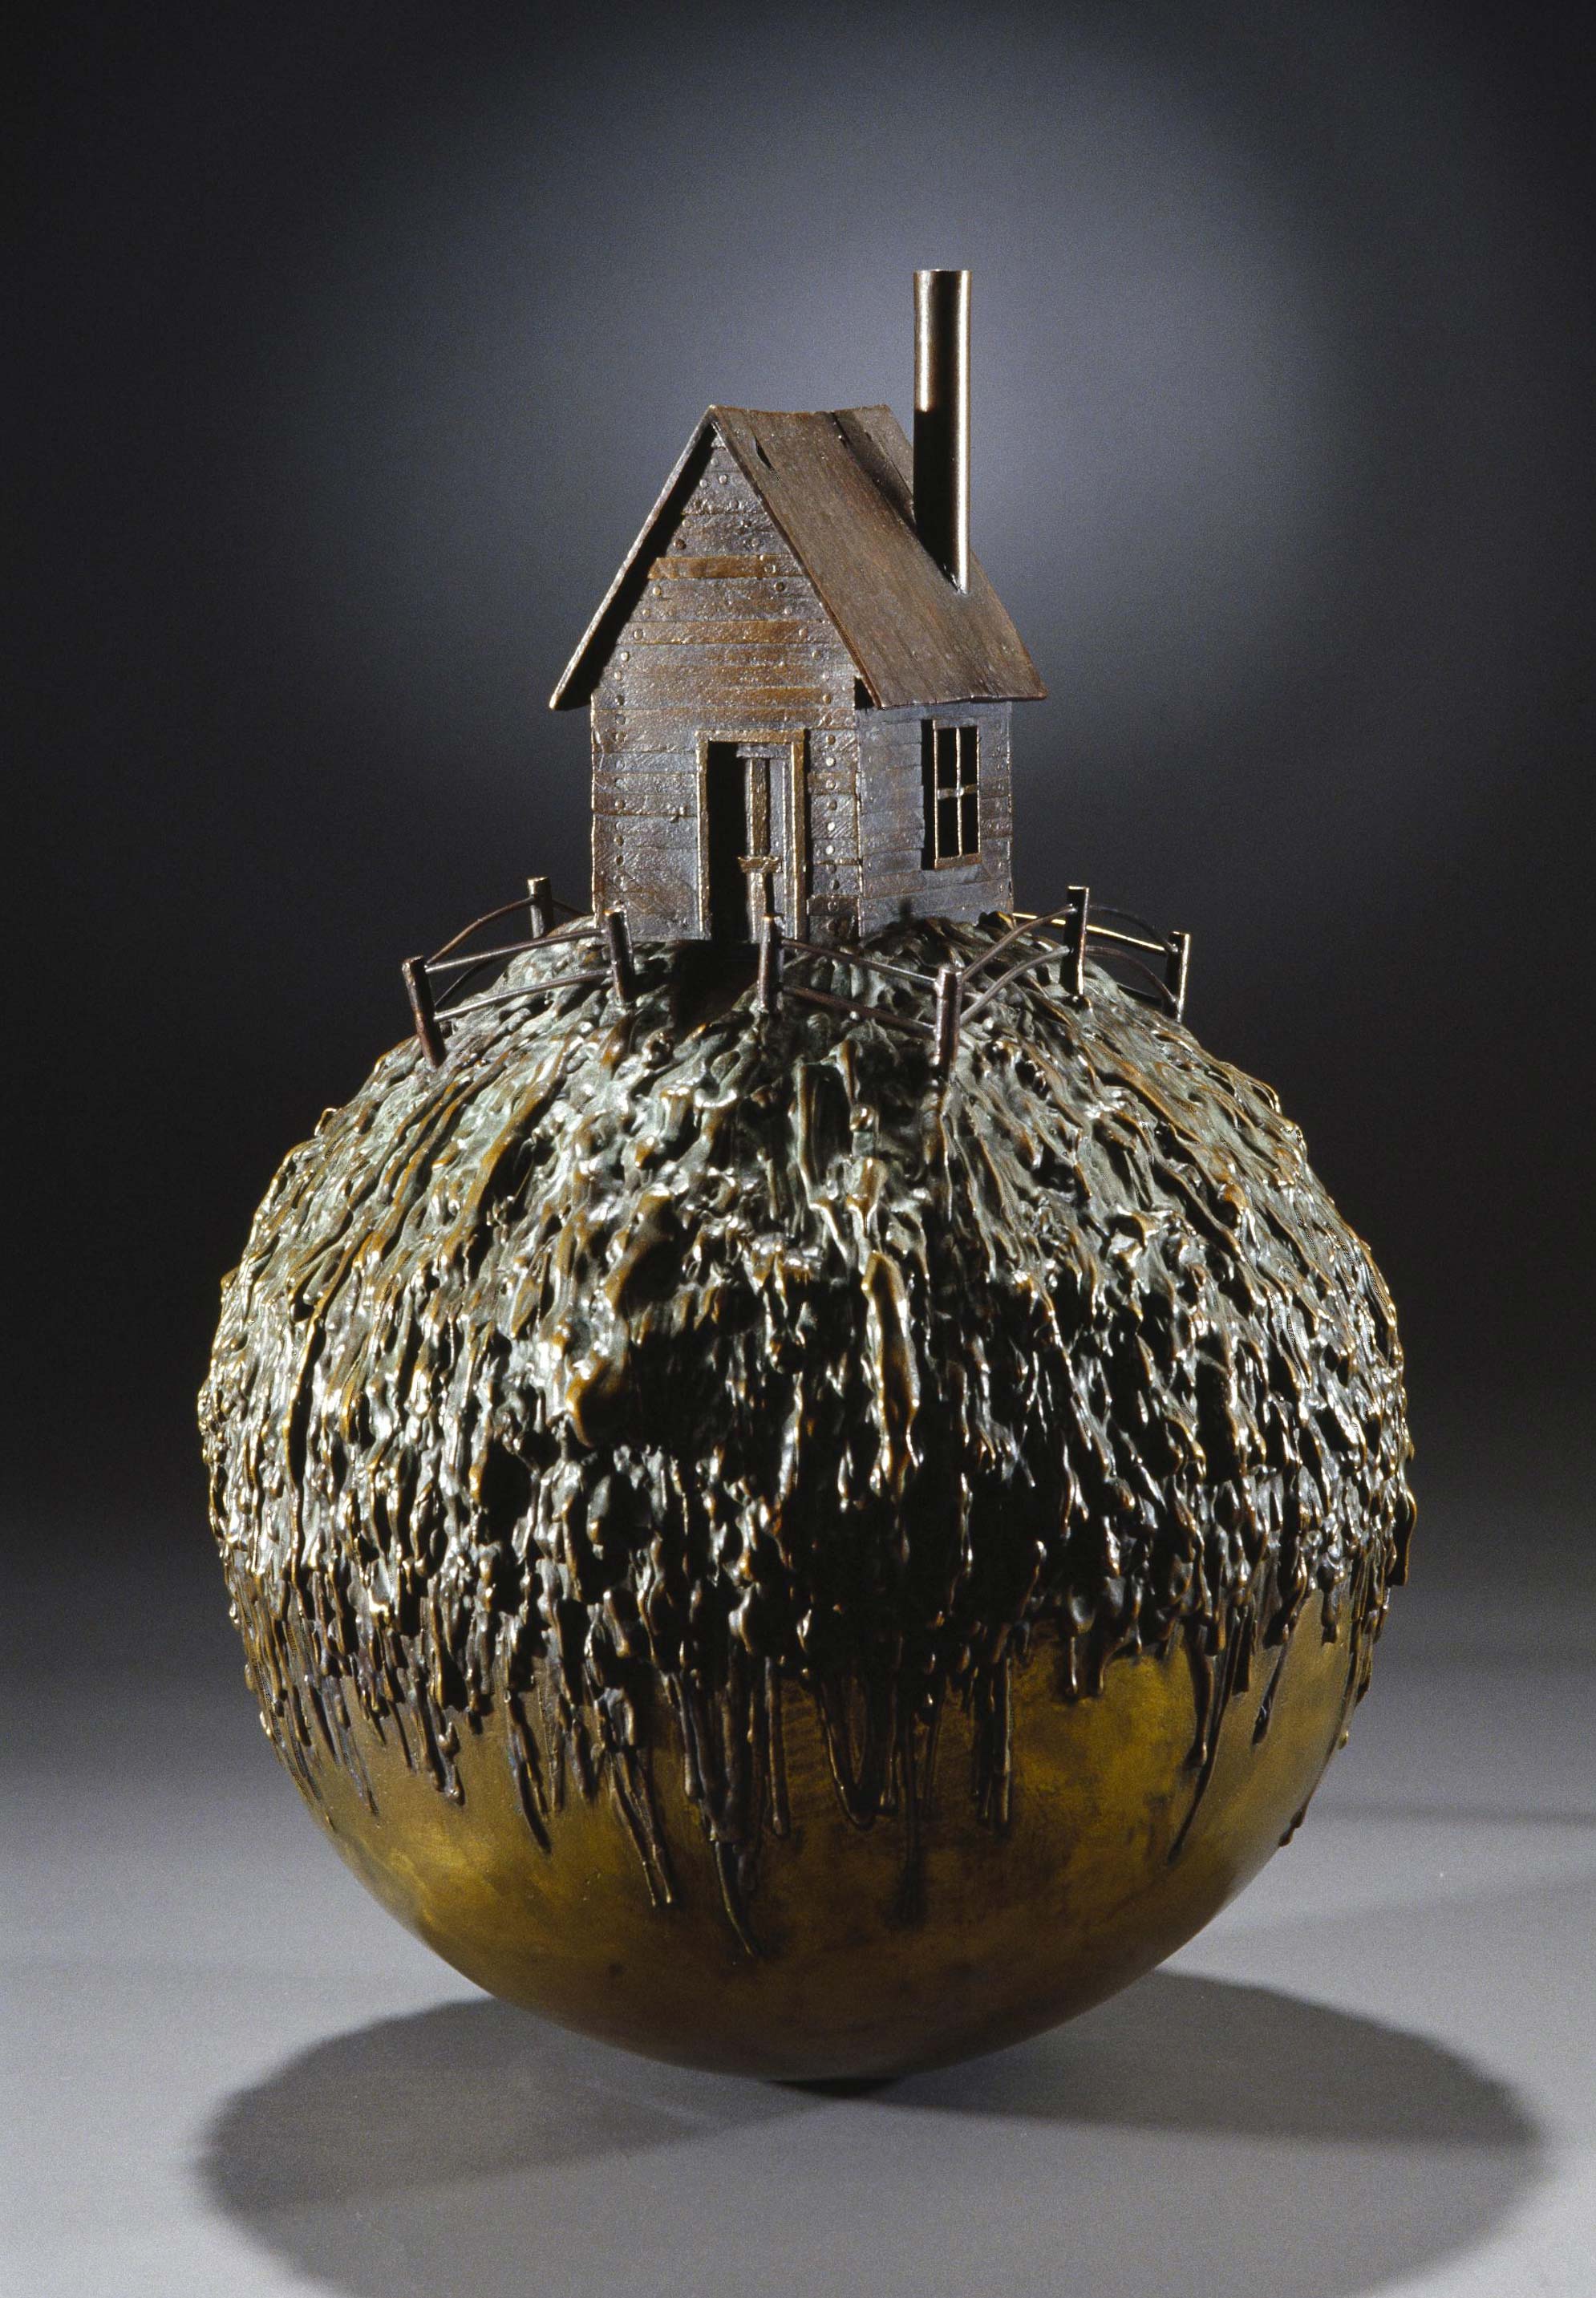 Bronze sculpture, "House With A Good View" by Henry Loustau